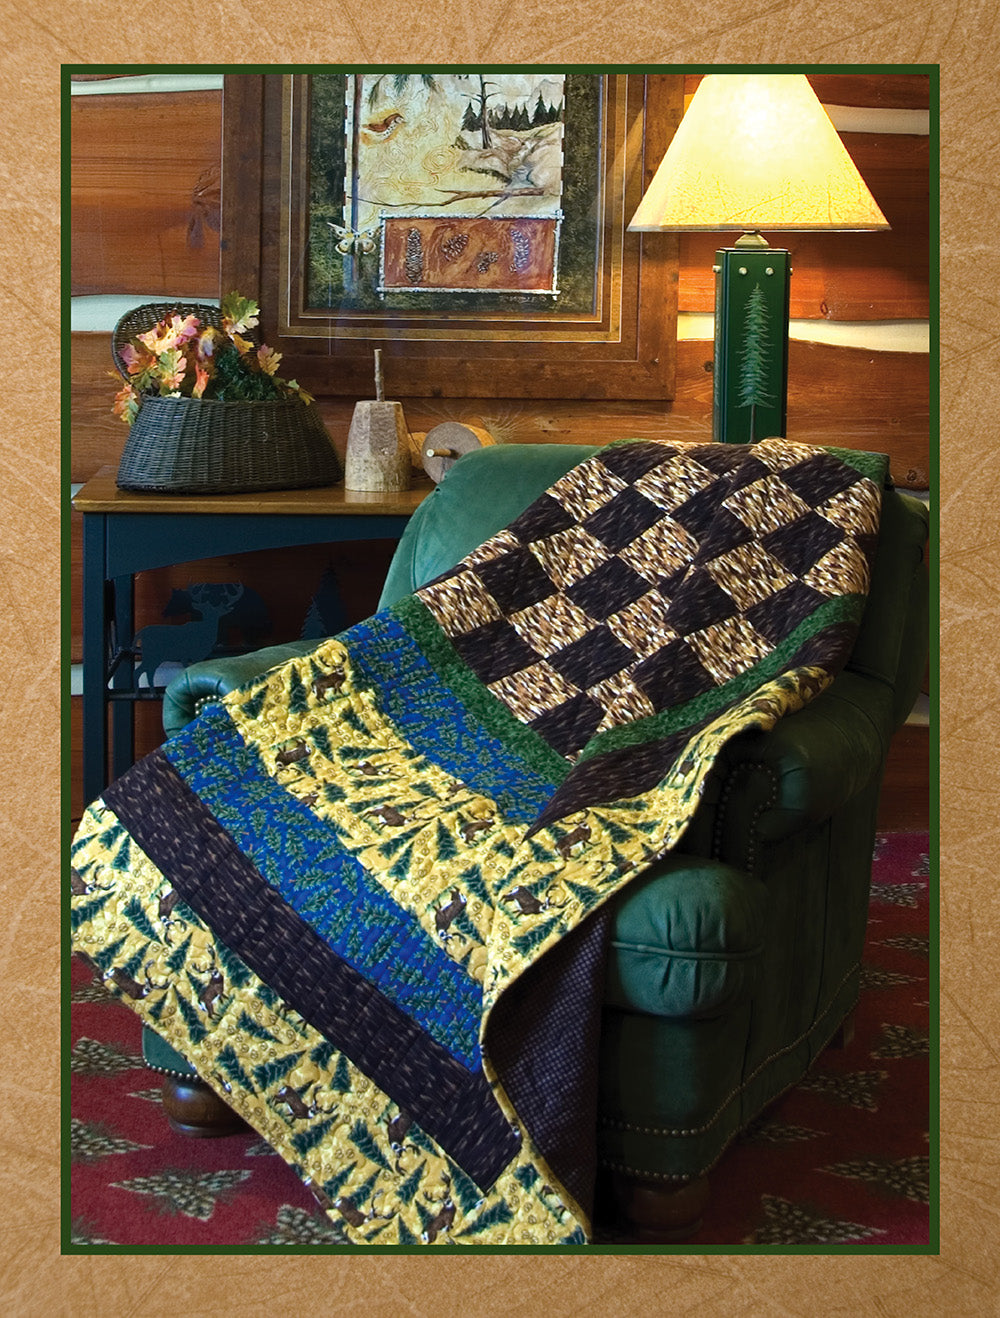 Granola Girl® Designs Northwoods Flannel Quilts & Projects